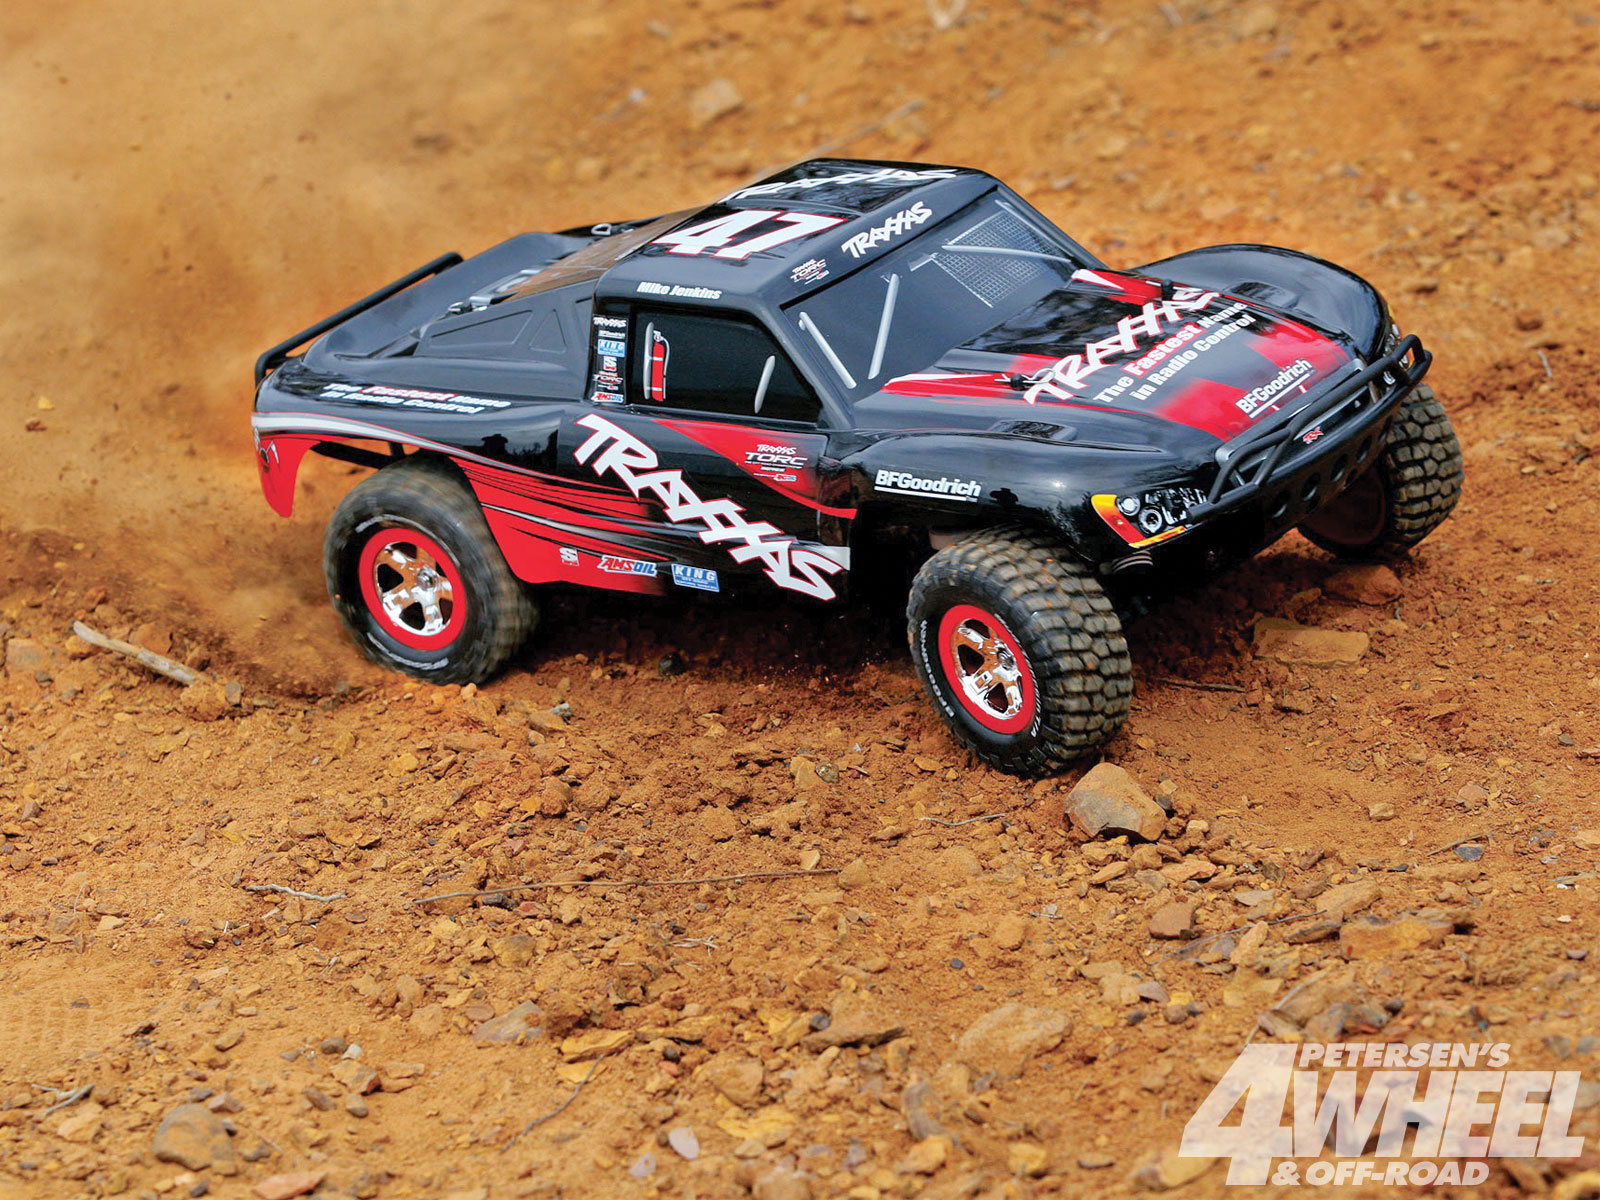 Free Download Traxxas Images Crazy Gallery 1600x1200 For Your Desktop Mobile Tablet Explore 50 Traxxas Slash Wallpaper Traxxas Slash Wallpaper Slash Wallpaper Traxxas Wallpaper